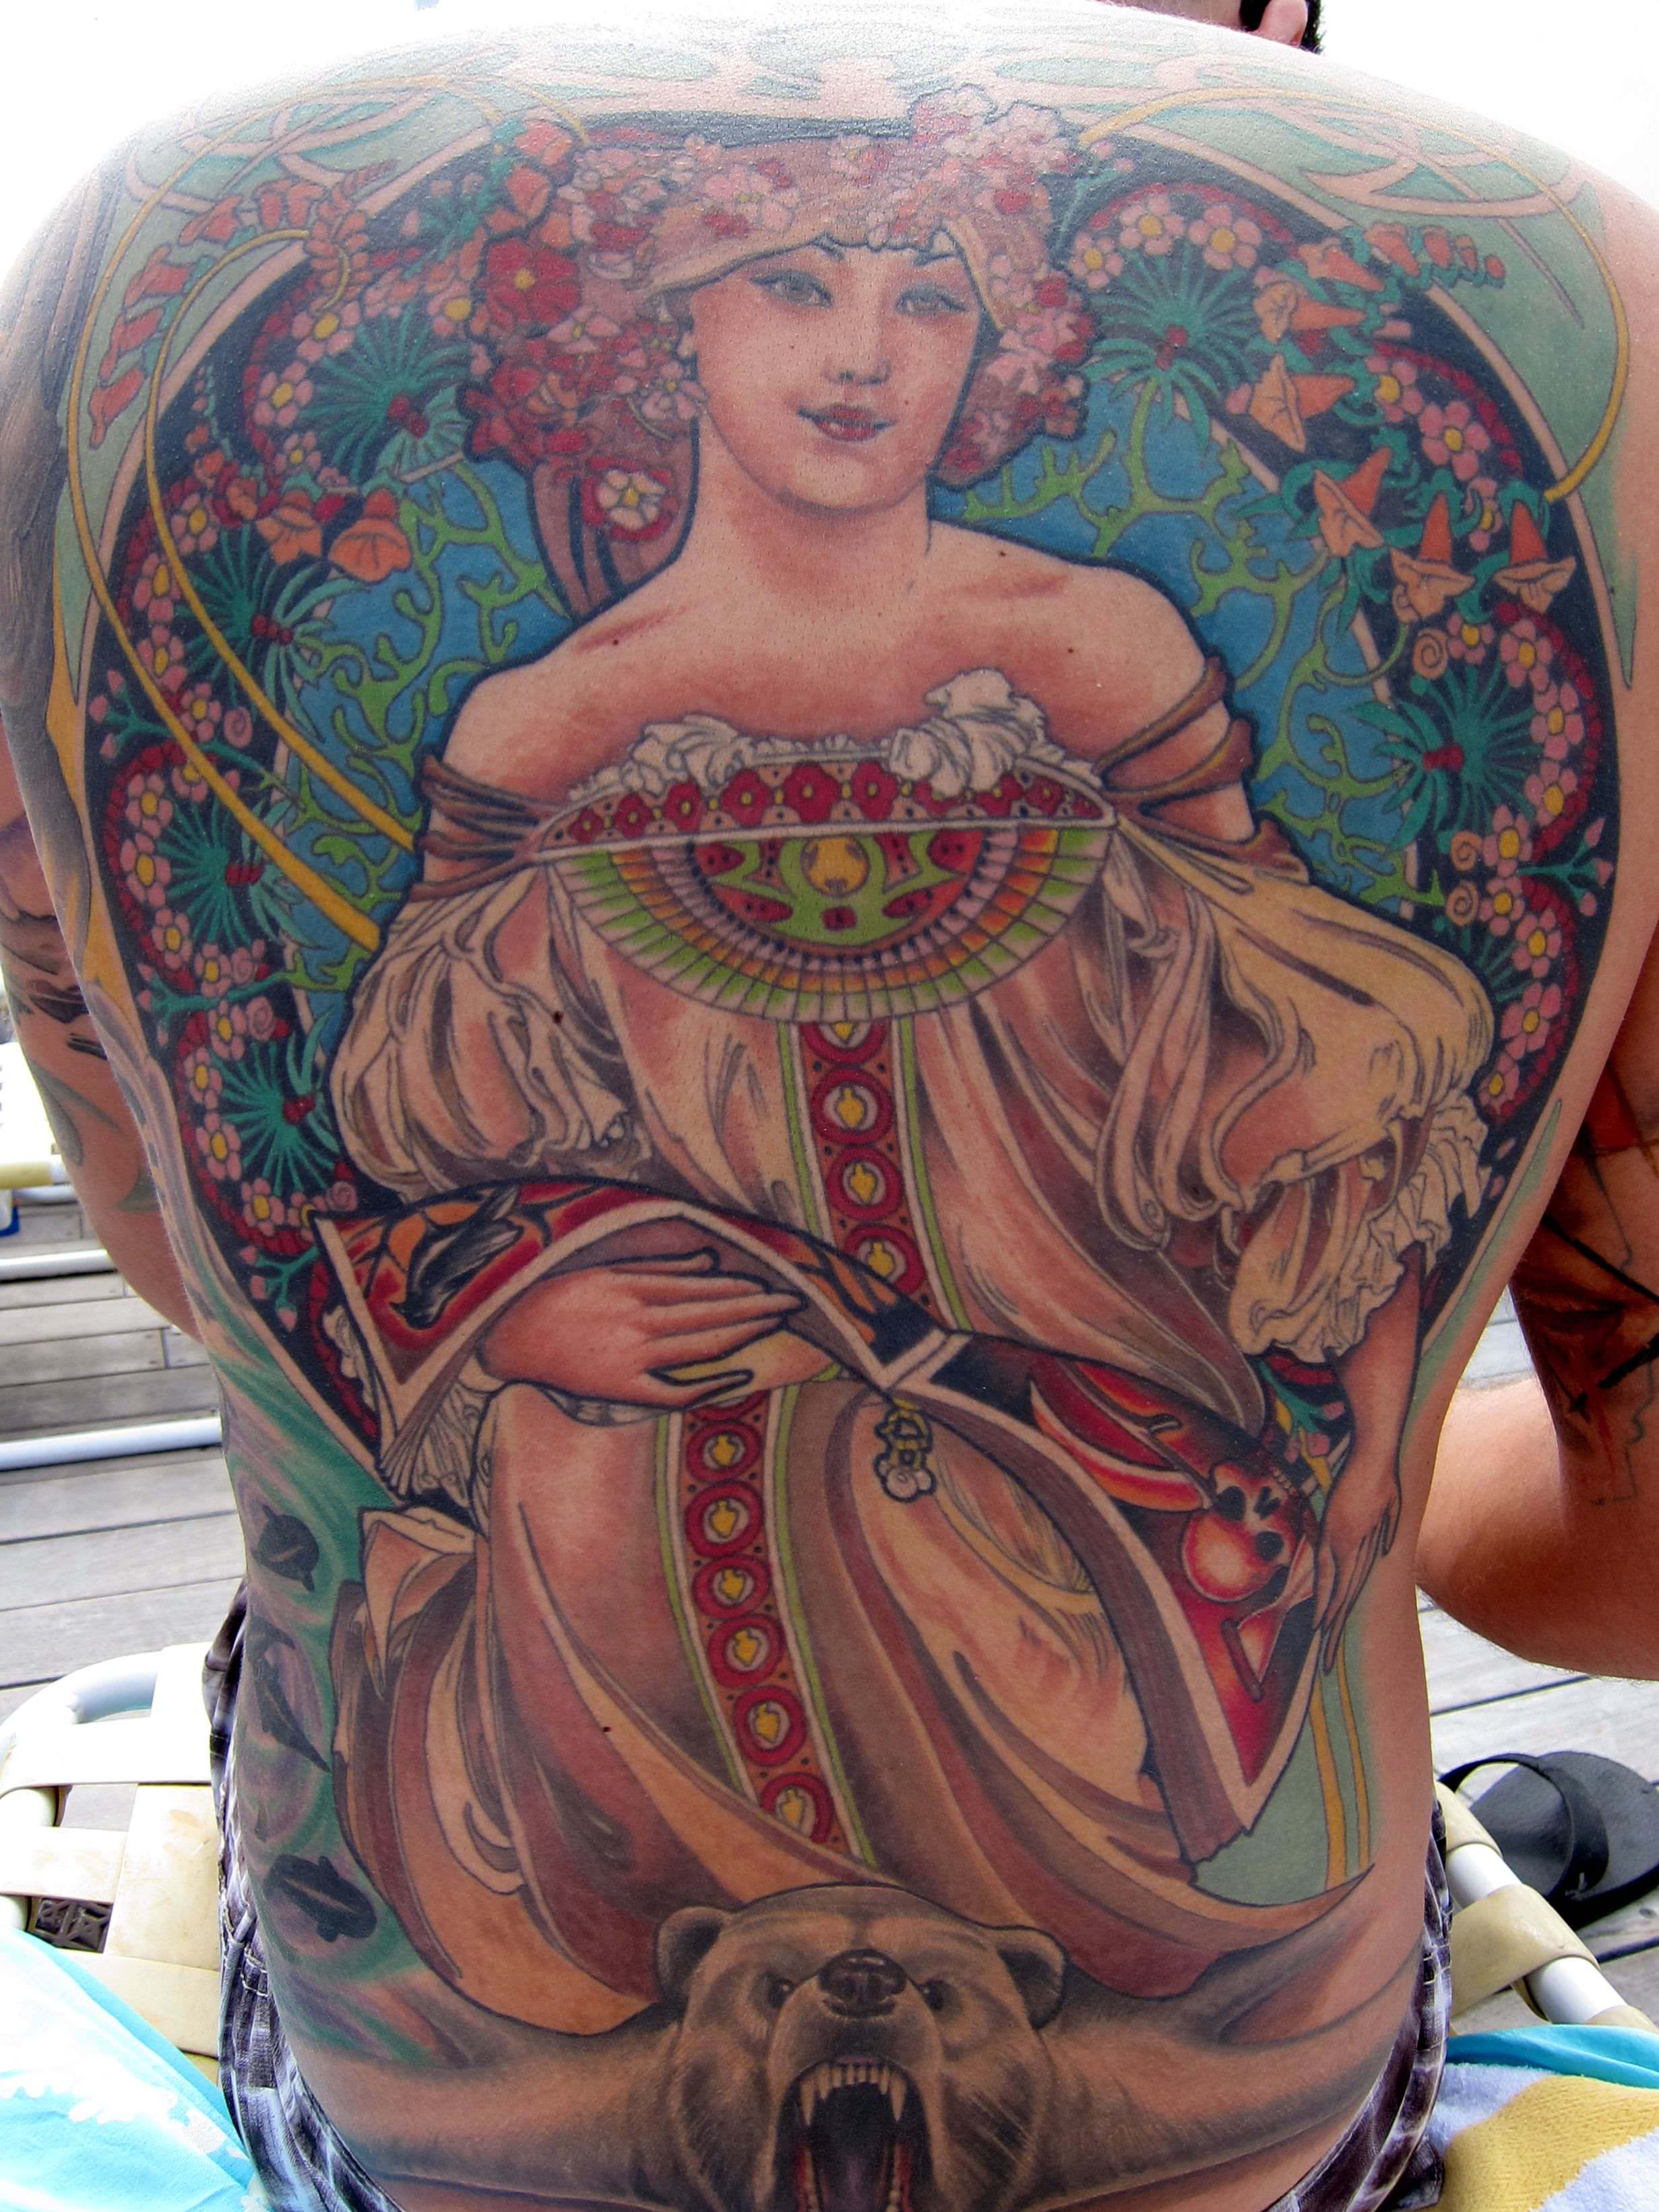 The bright colors and intricate details of Art Deco tattoos are